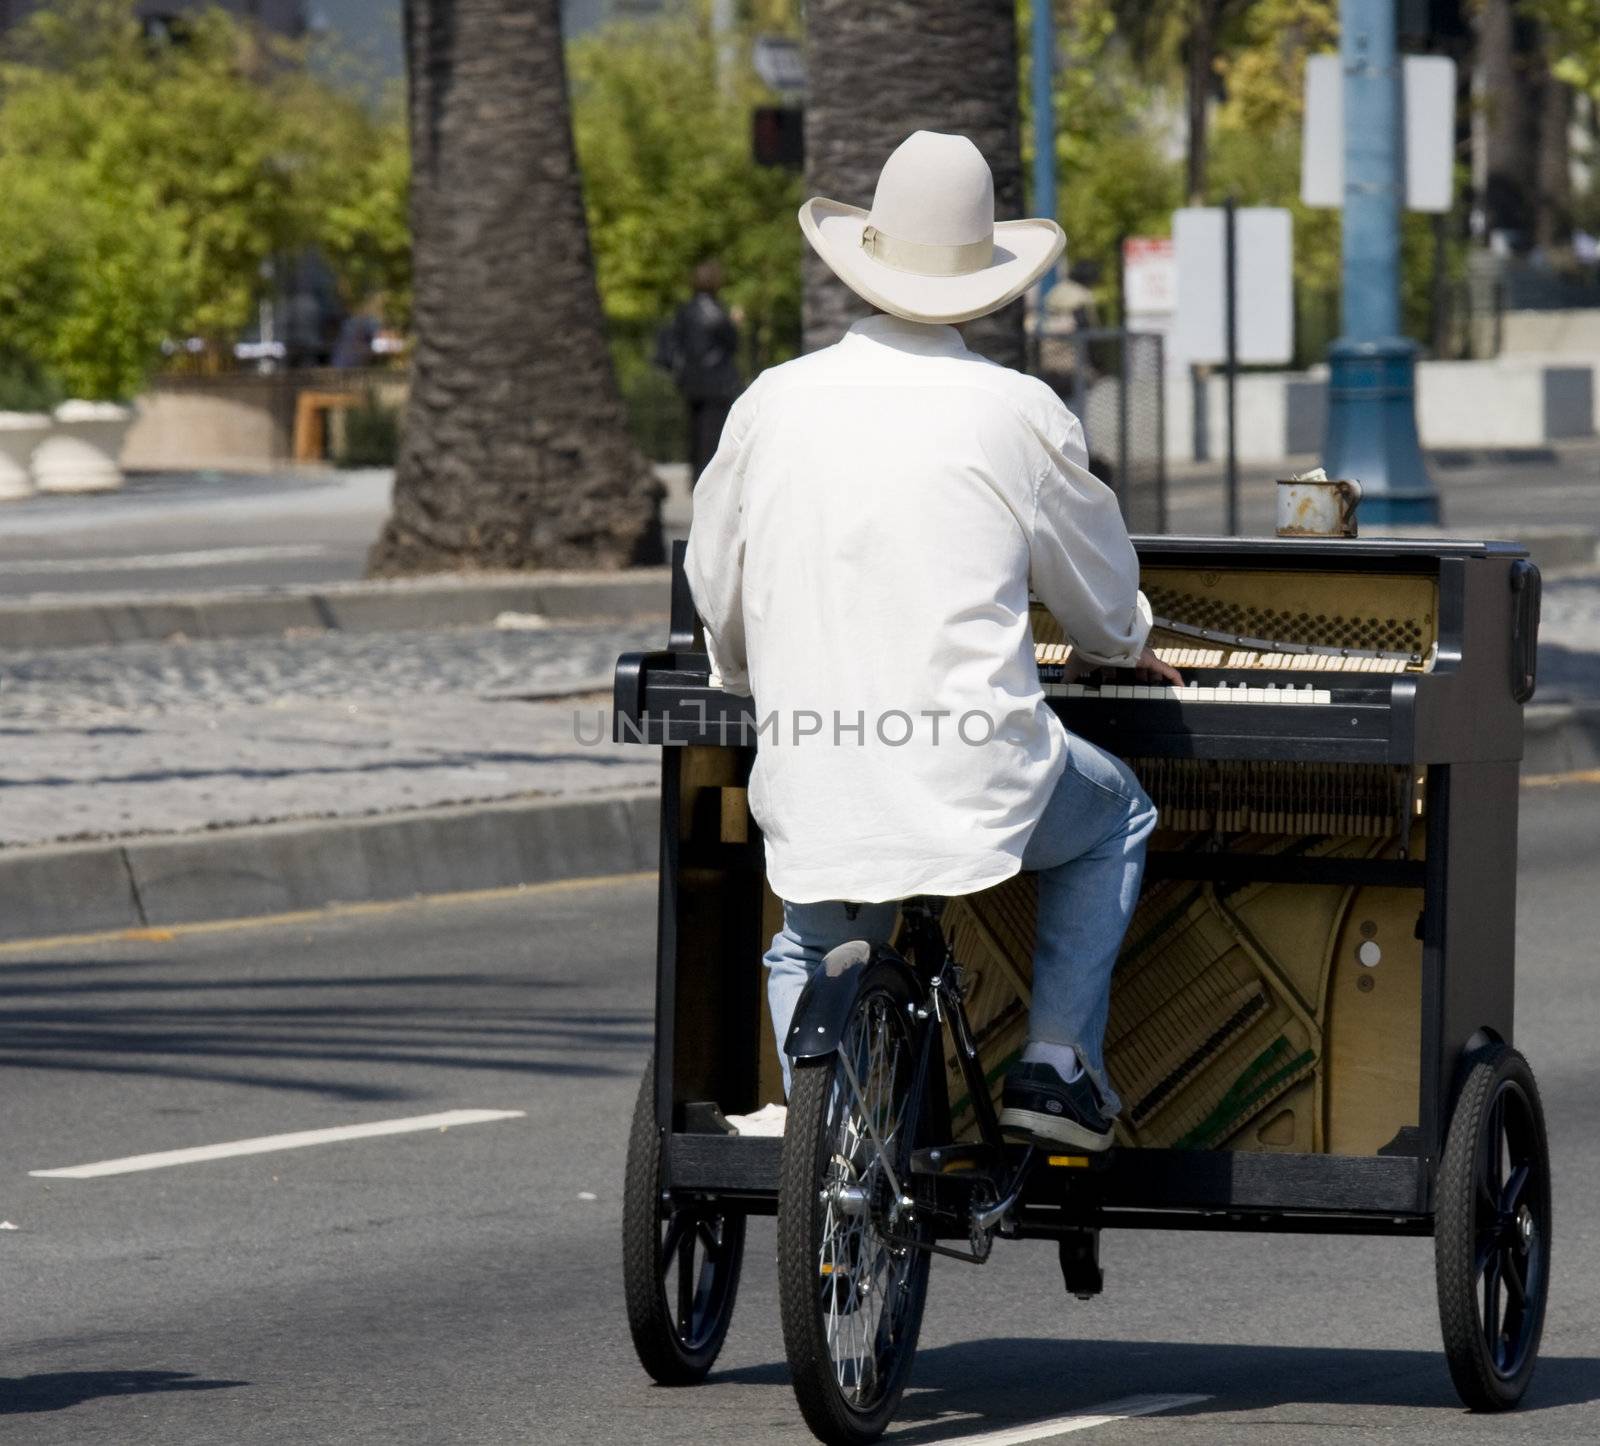 Man with white hat riding piano bike down street